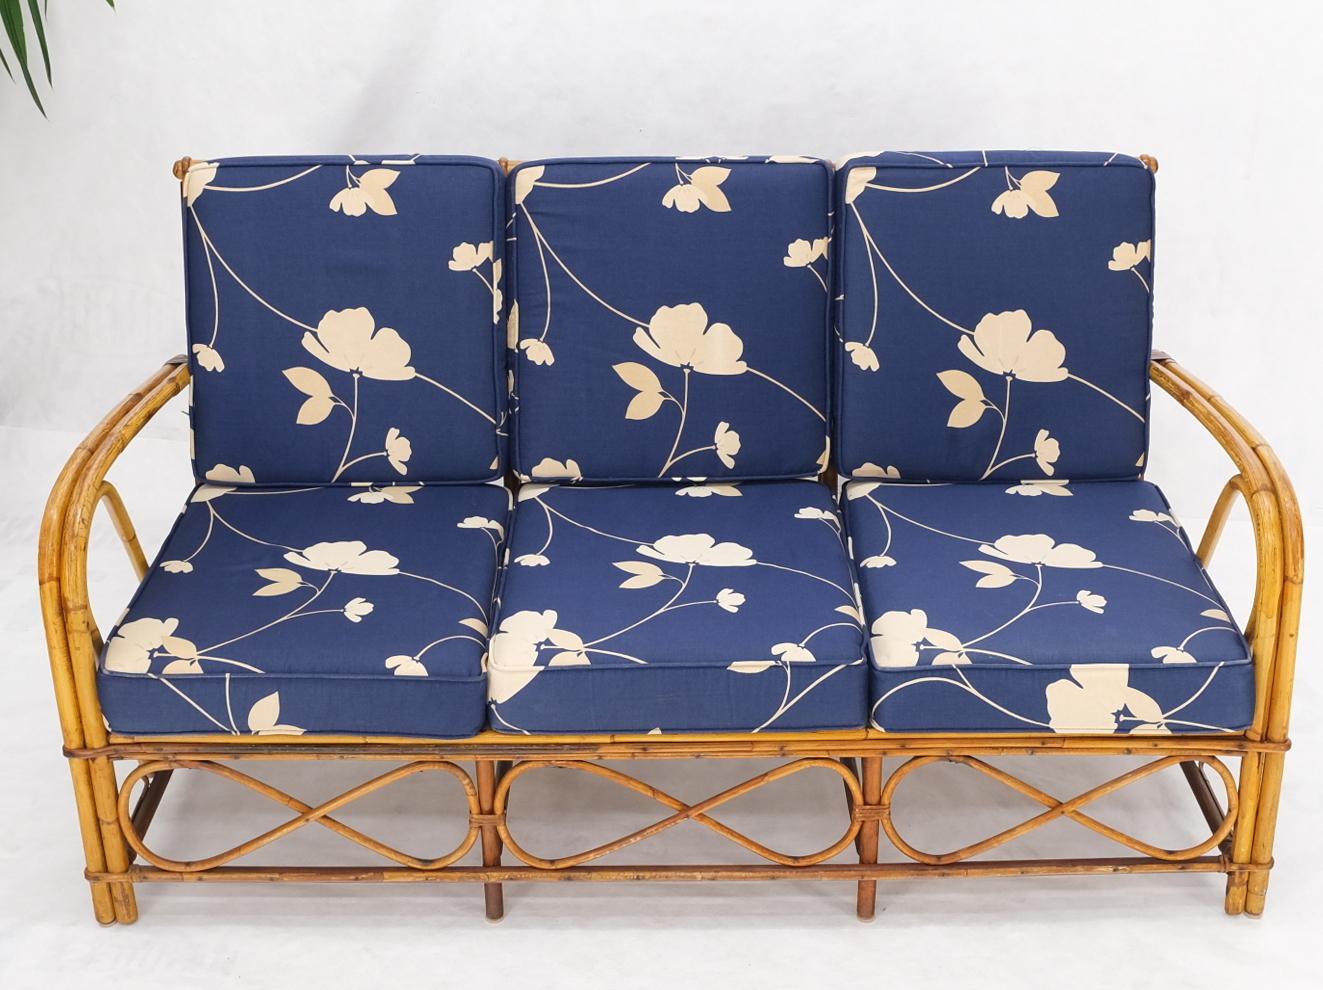 Split Reed Wicker Rattan Bamboo 3 Seater Sofa Blue & White Cushions In Good Condition For Sale In Rockaway, NJ